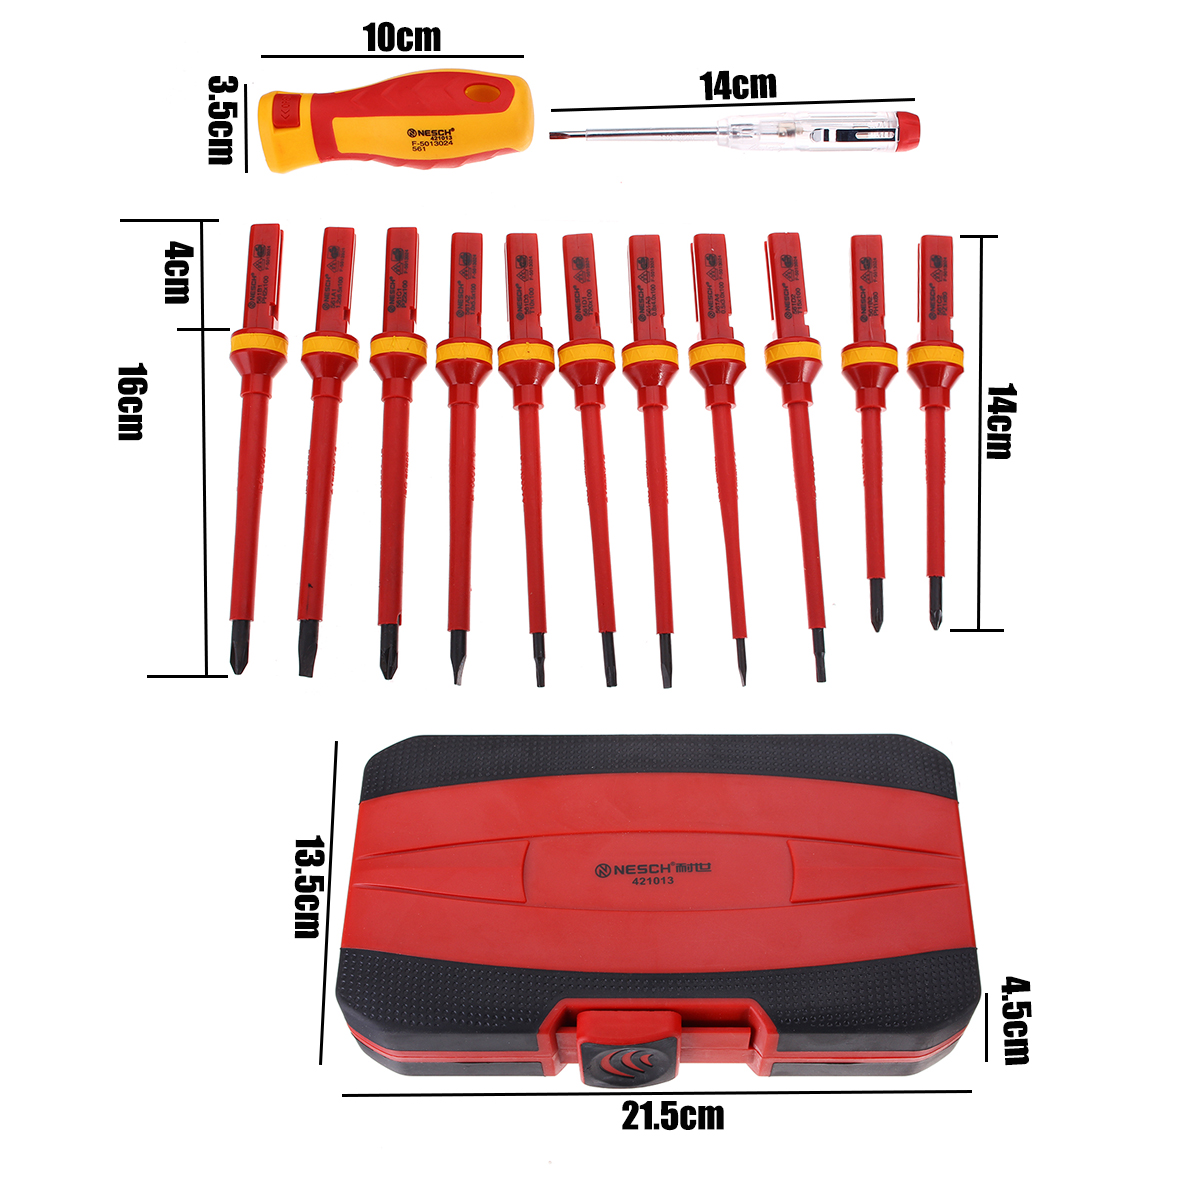 13Pcs 1000V Electronic Insulated Screwdriver Set Phillips Slotted Torx CR-V Screwdriver Repair Tools 15